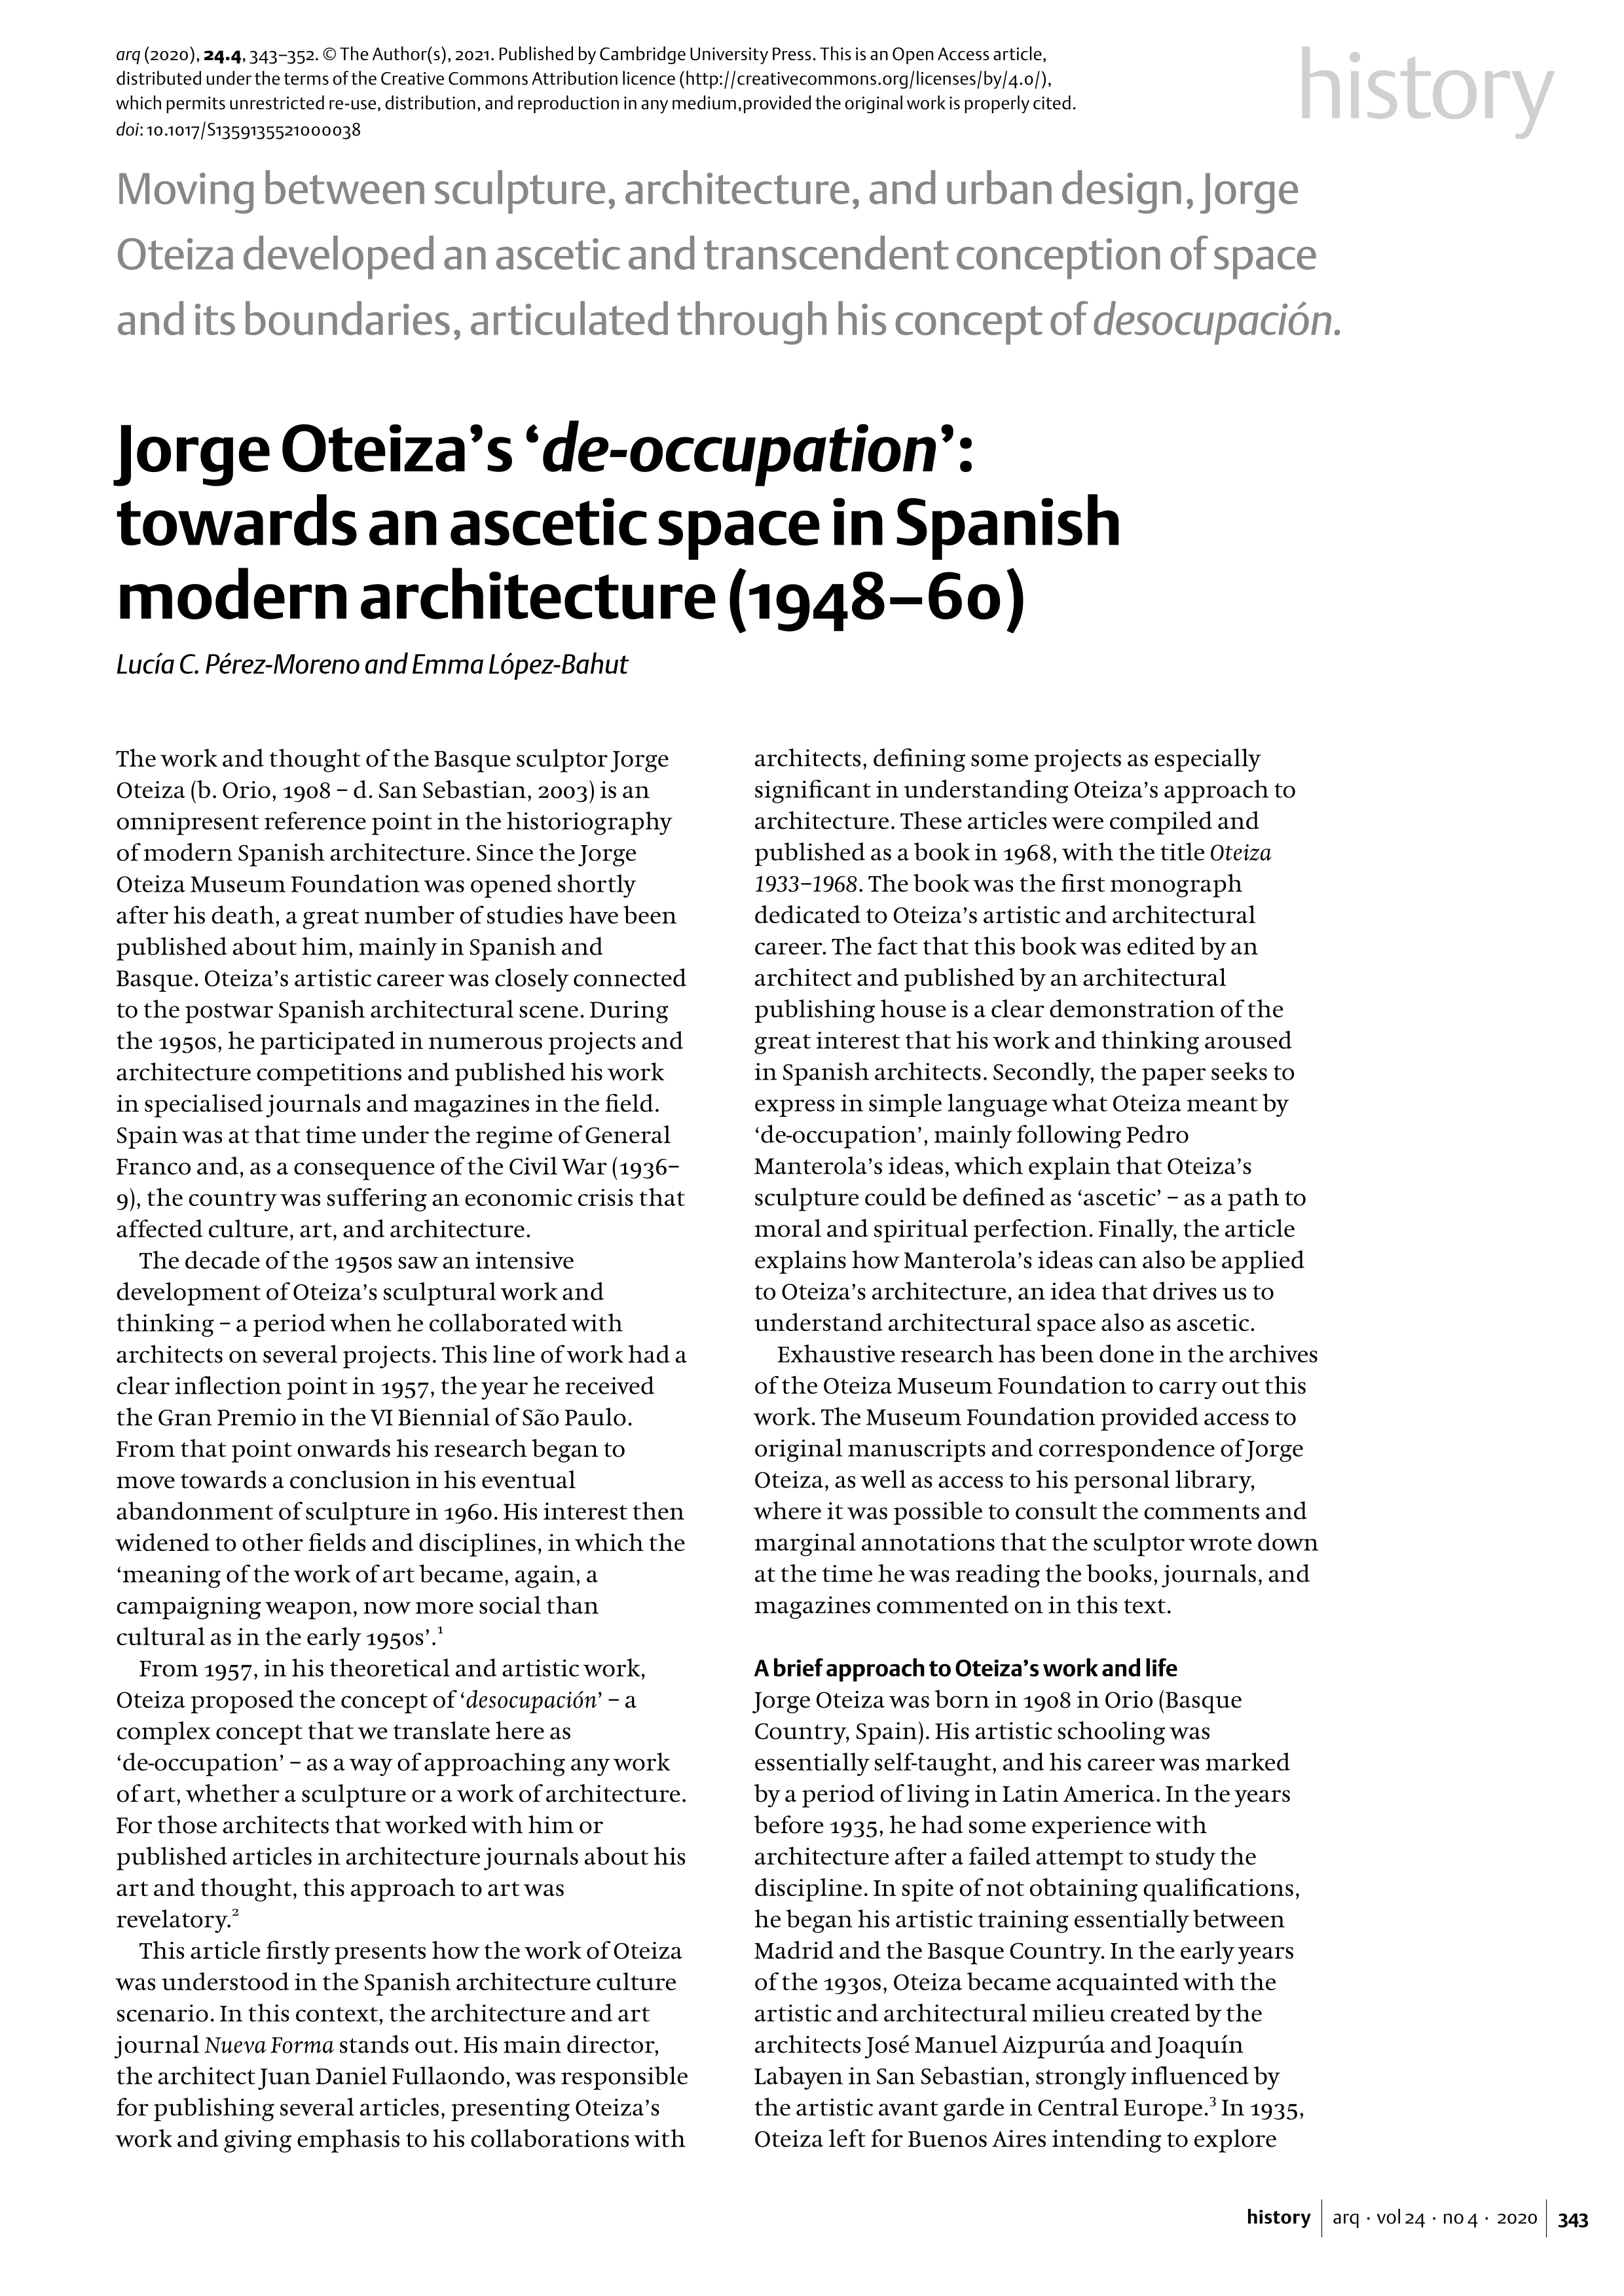 Jorge Oteiza’s ‘de-occupation’: towards an ascetic space in Spanish modern architecture (1948-60)